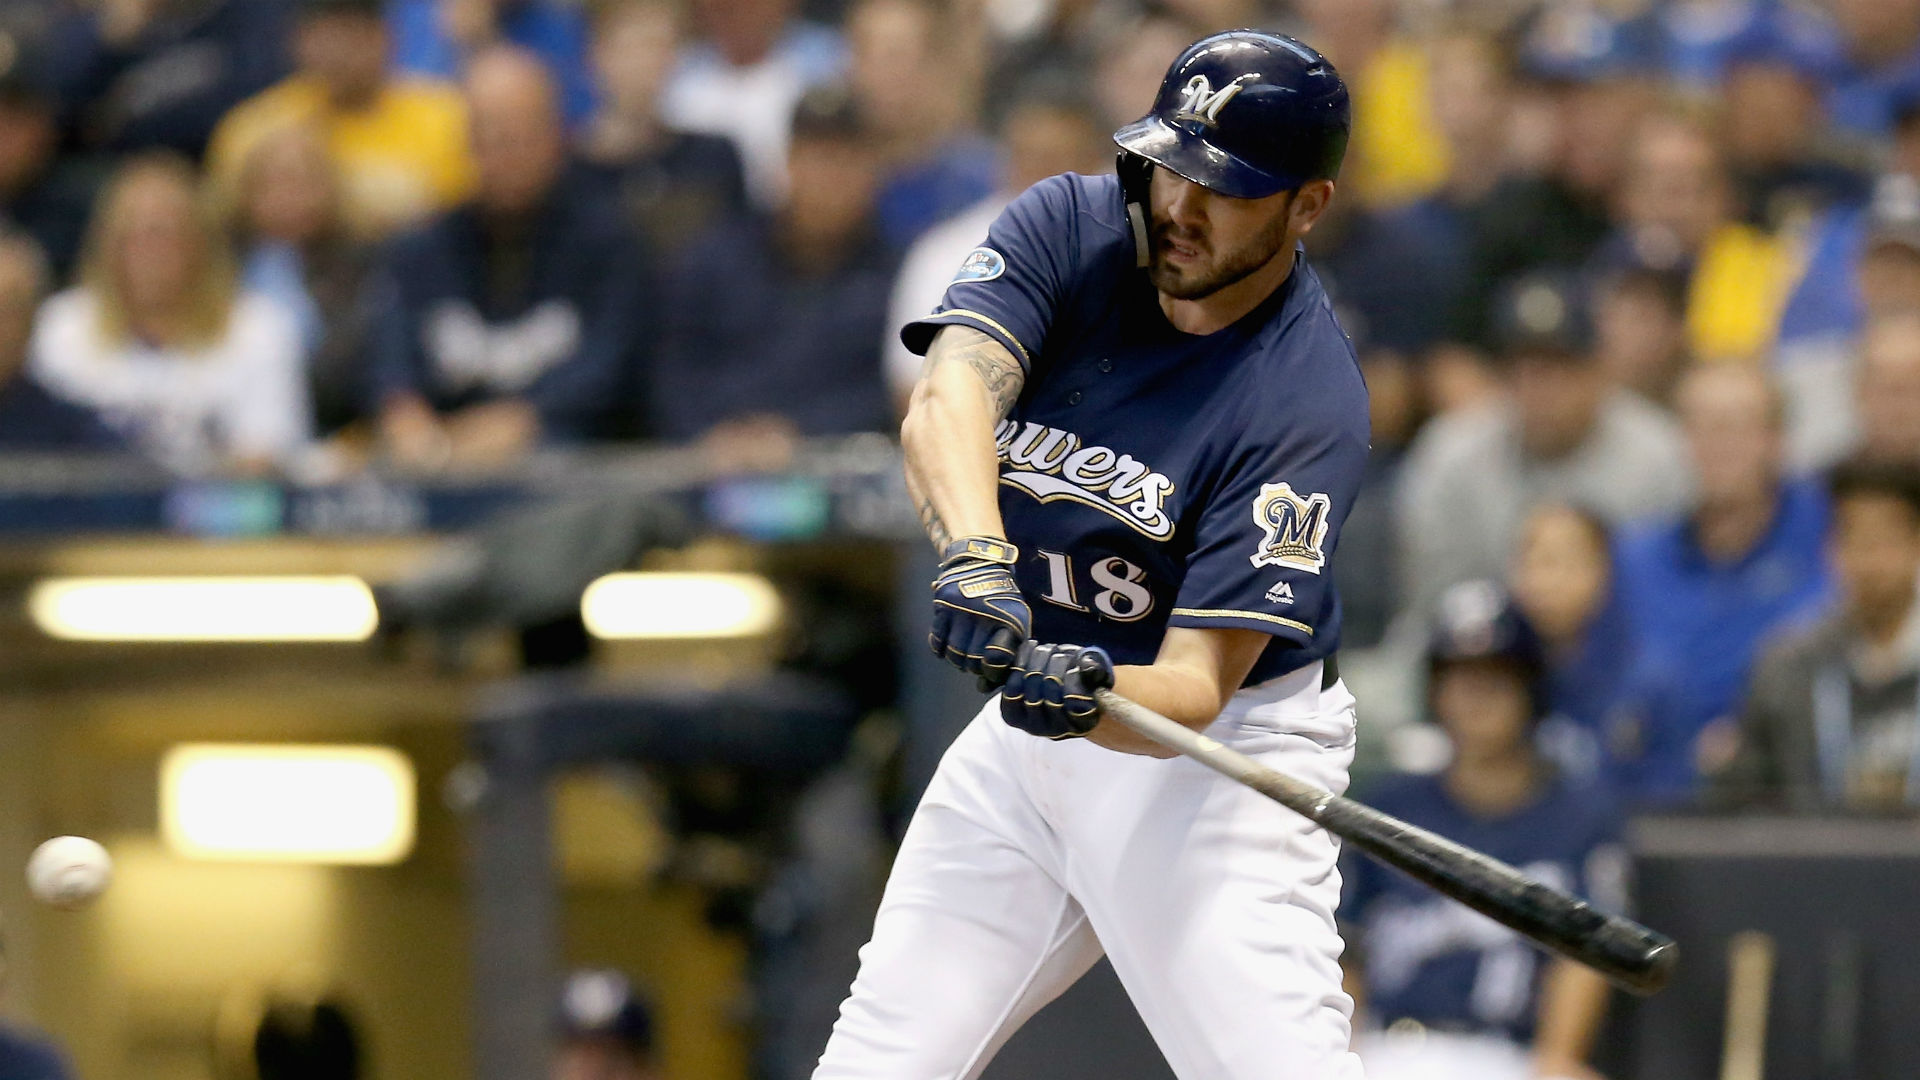 Moustakas began last season with the Royals but was sent to the Brewers at the trade deadline in exchange for two minor leaguers.